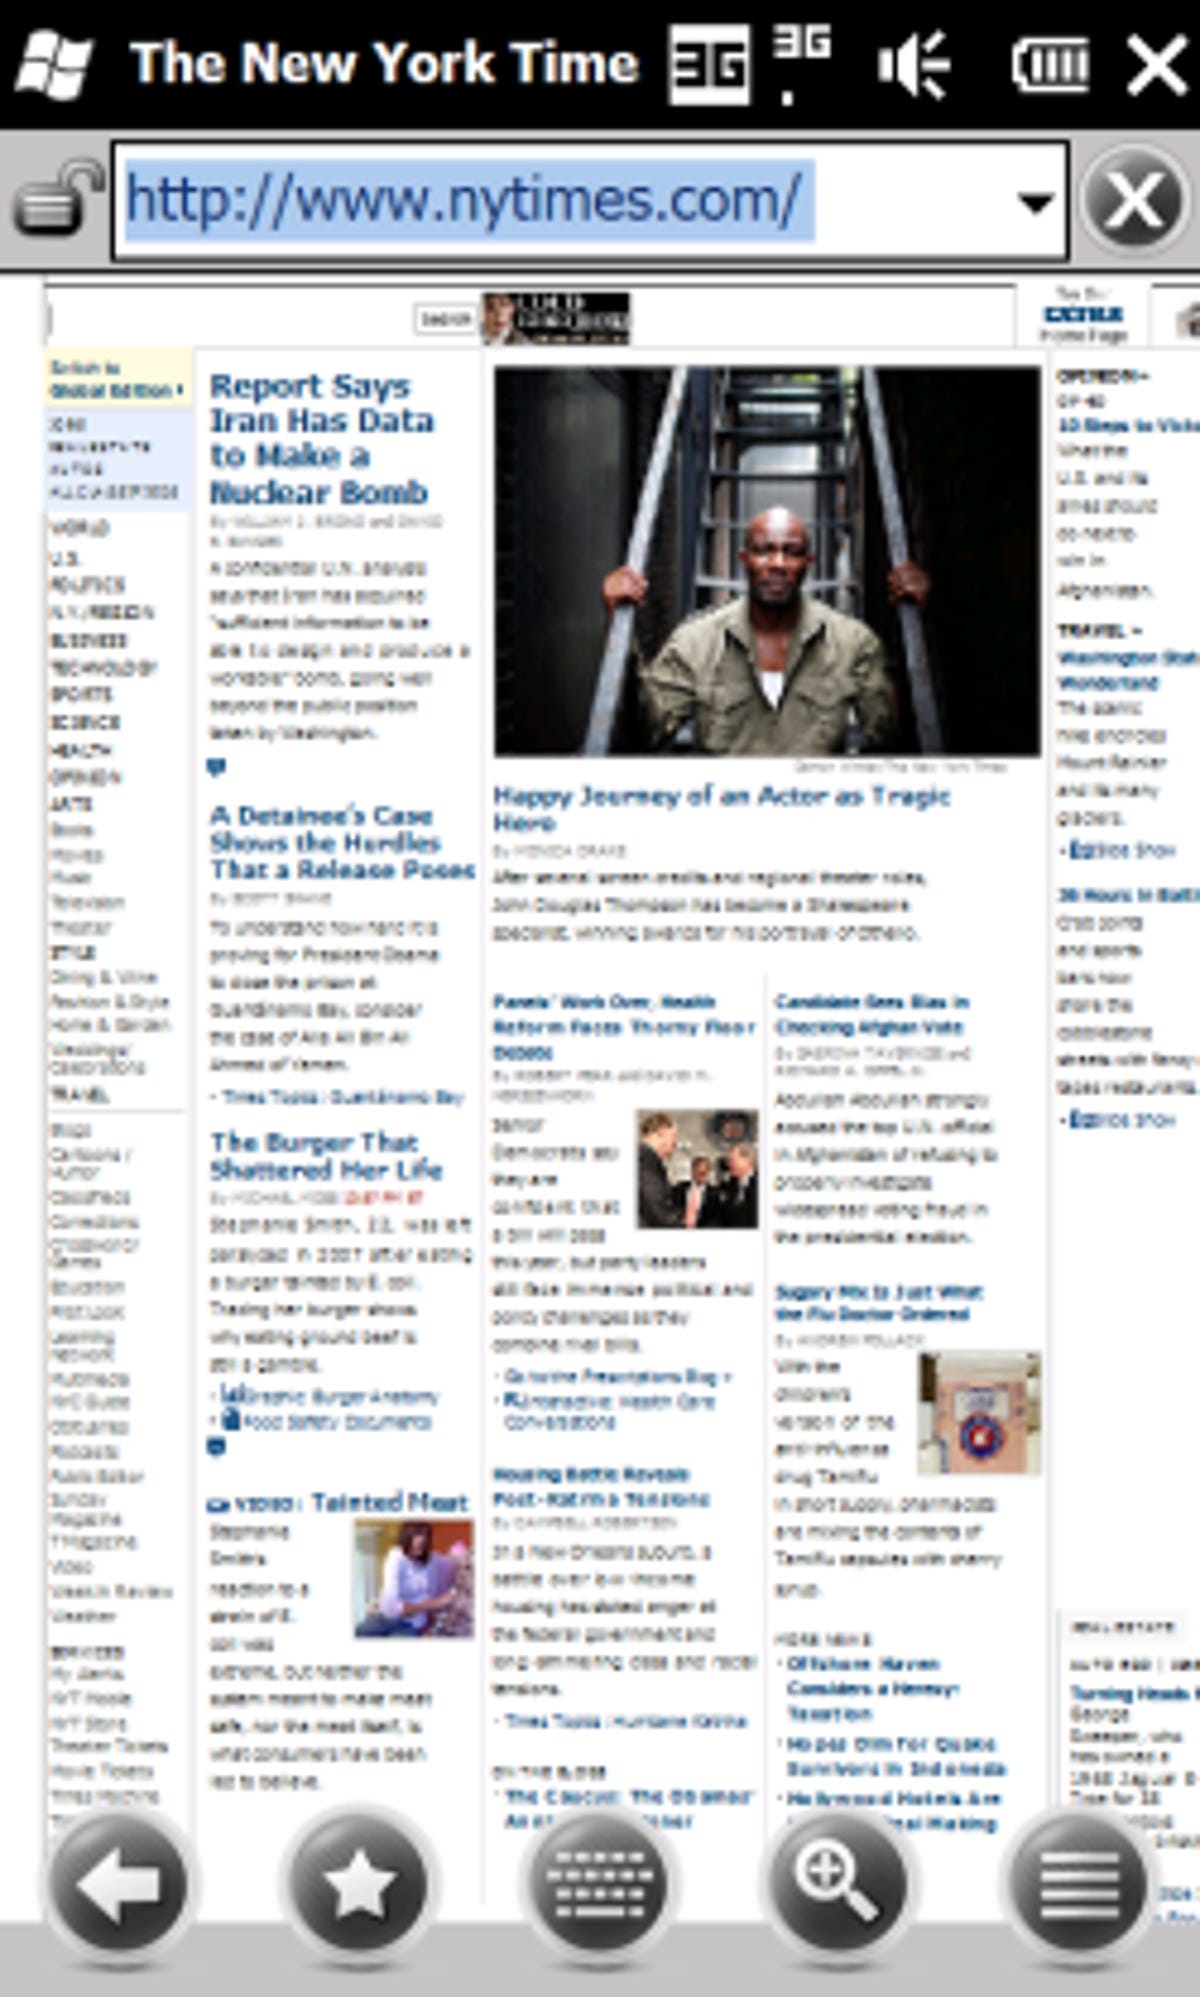 IEMobile6_NYTimes_300px.png